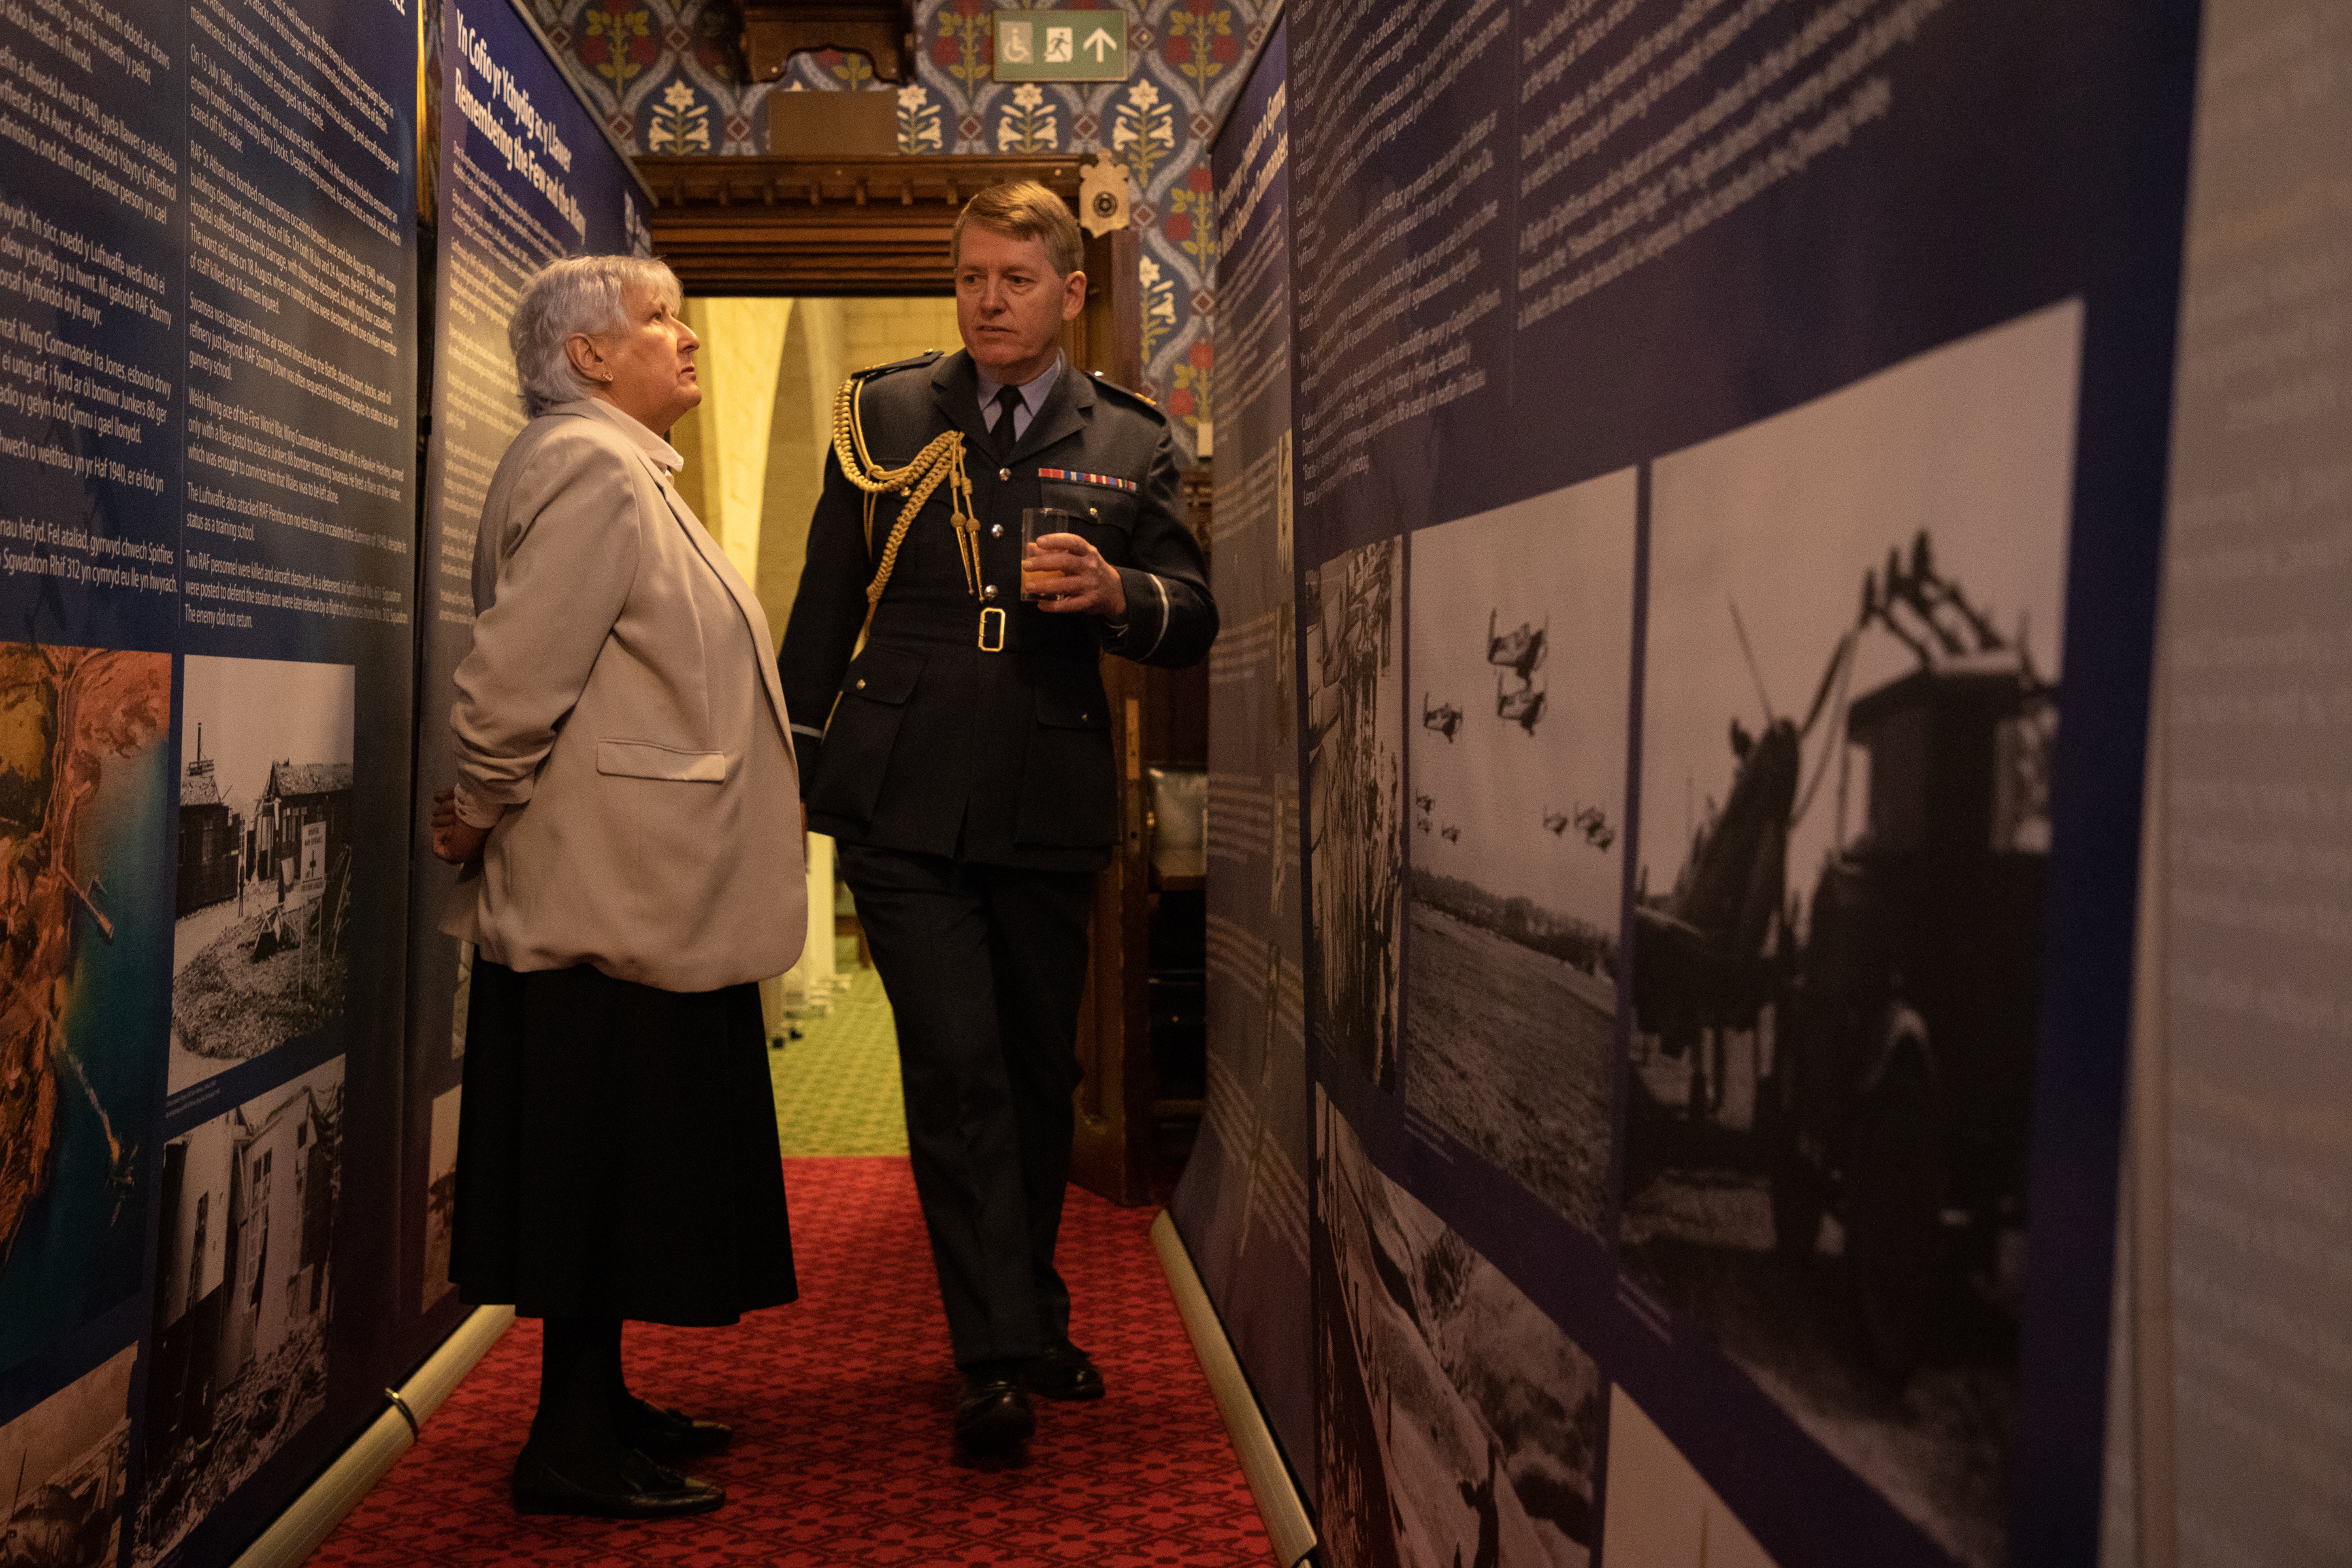 Image shows RAF aviator and civilian looking at pictures in exhibition. 